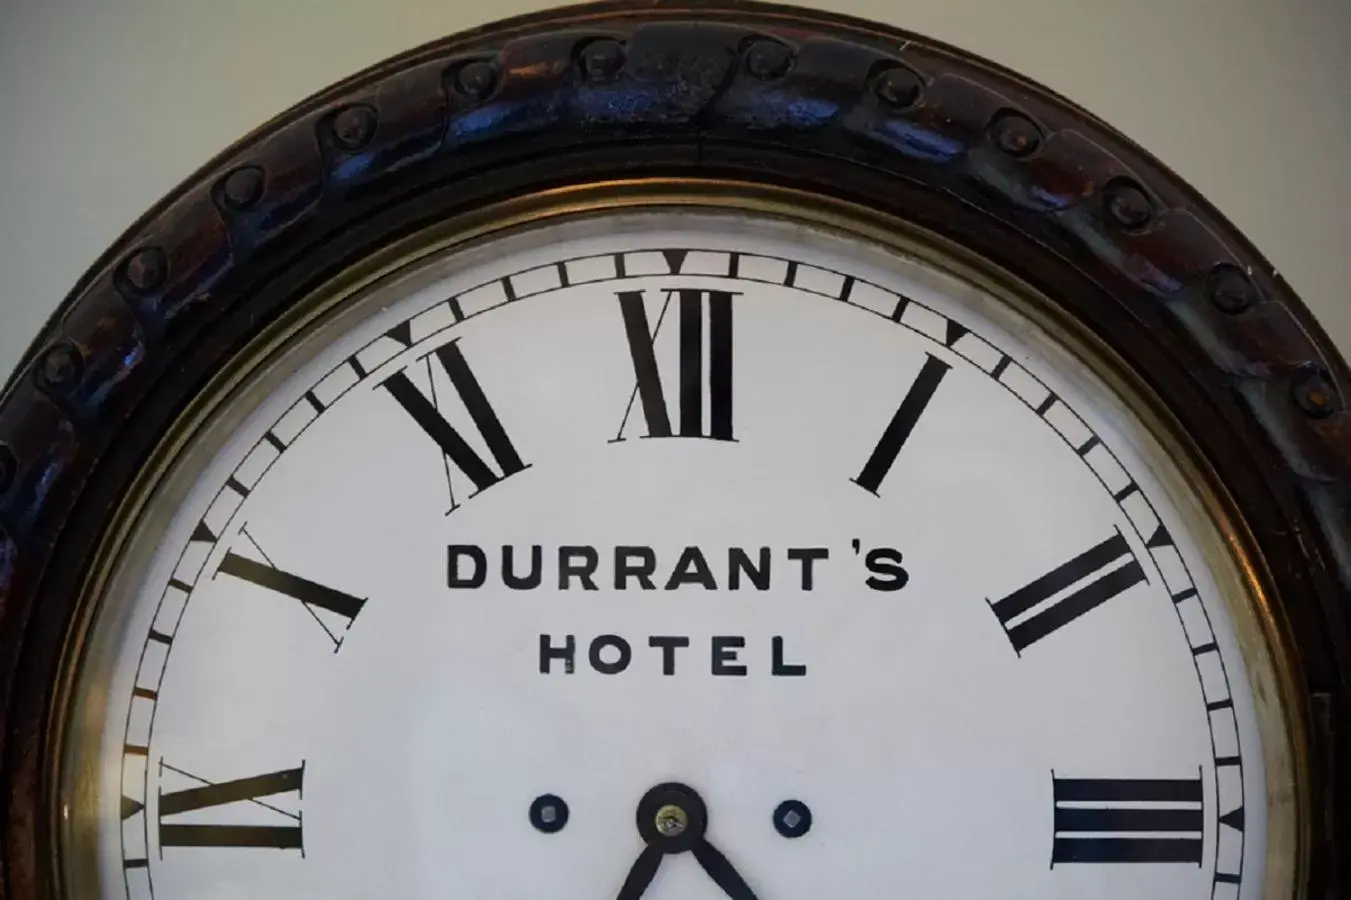 Decorative detail in Durrants Hotel